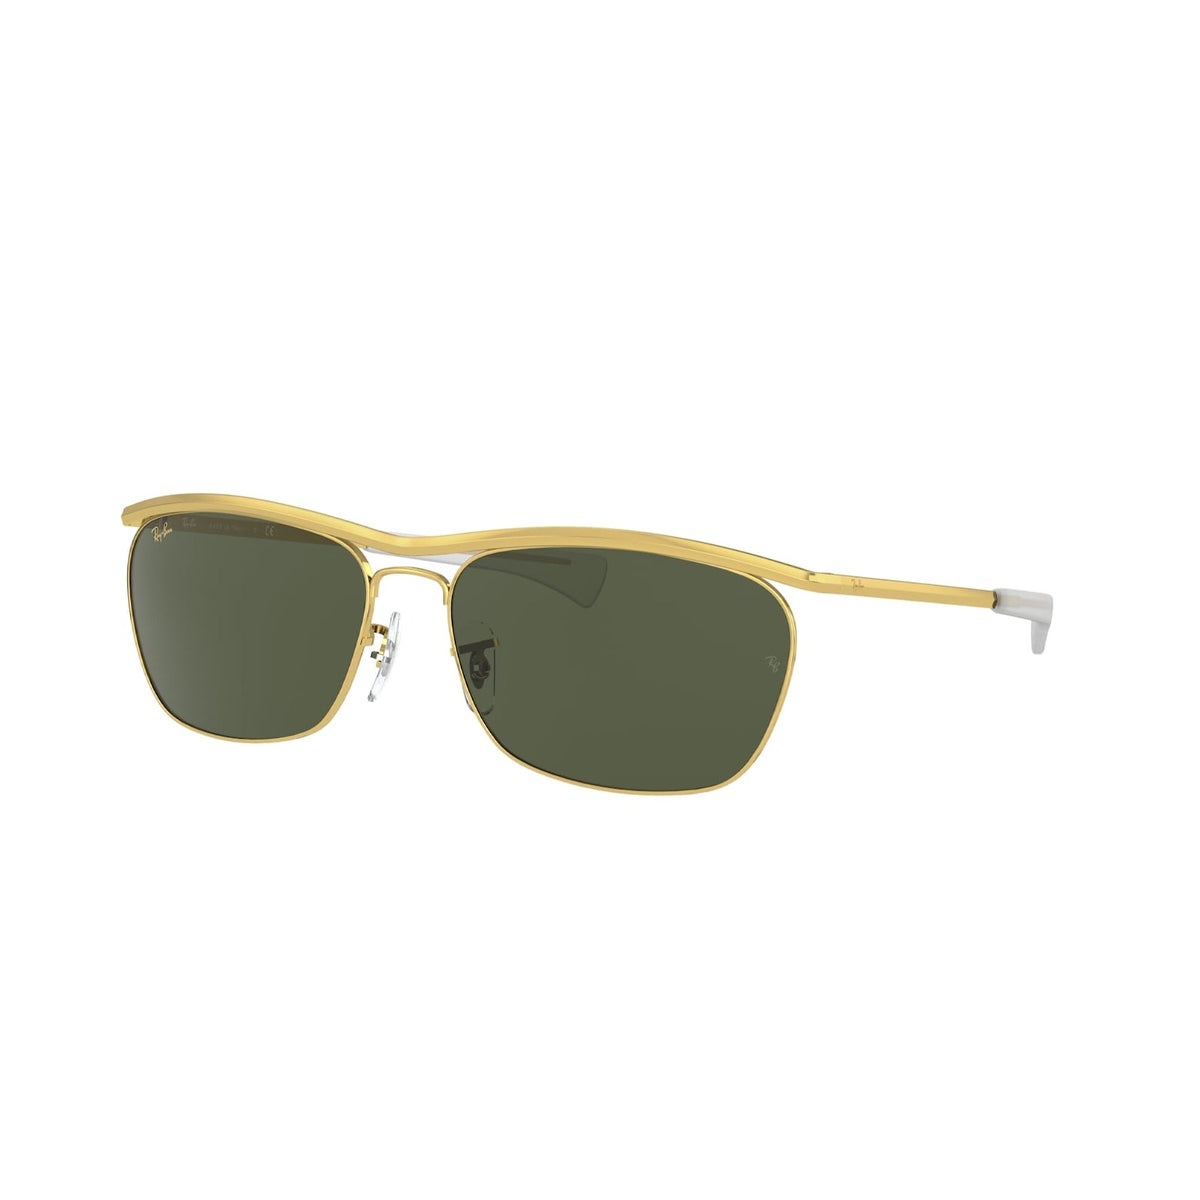 Ray-Ban Unisex Sunglasses Olympian II Deluxe Gold G-15 Green Metal Metal  0RB3619 919631 60